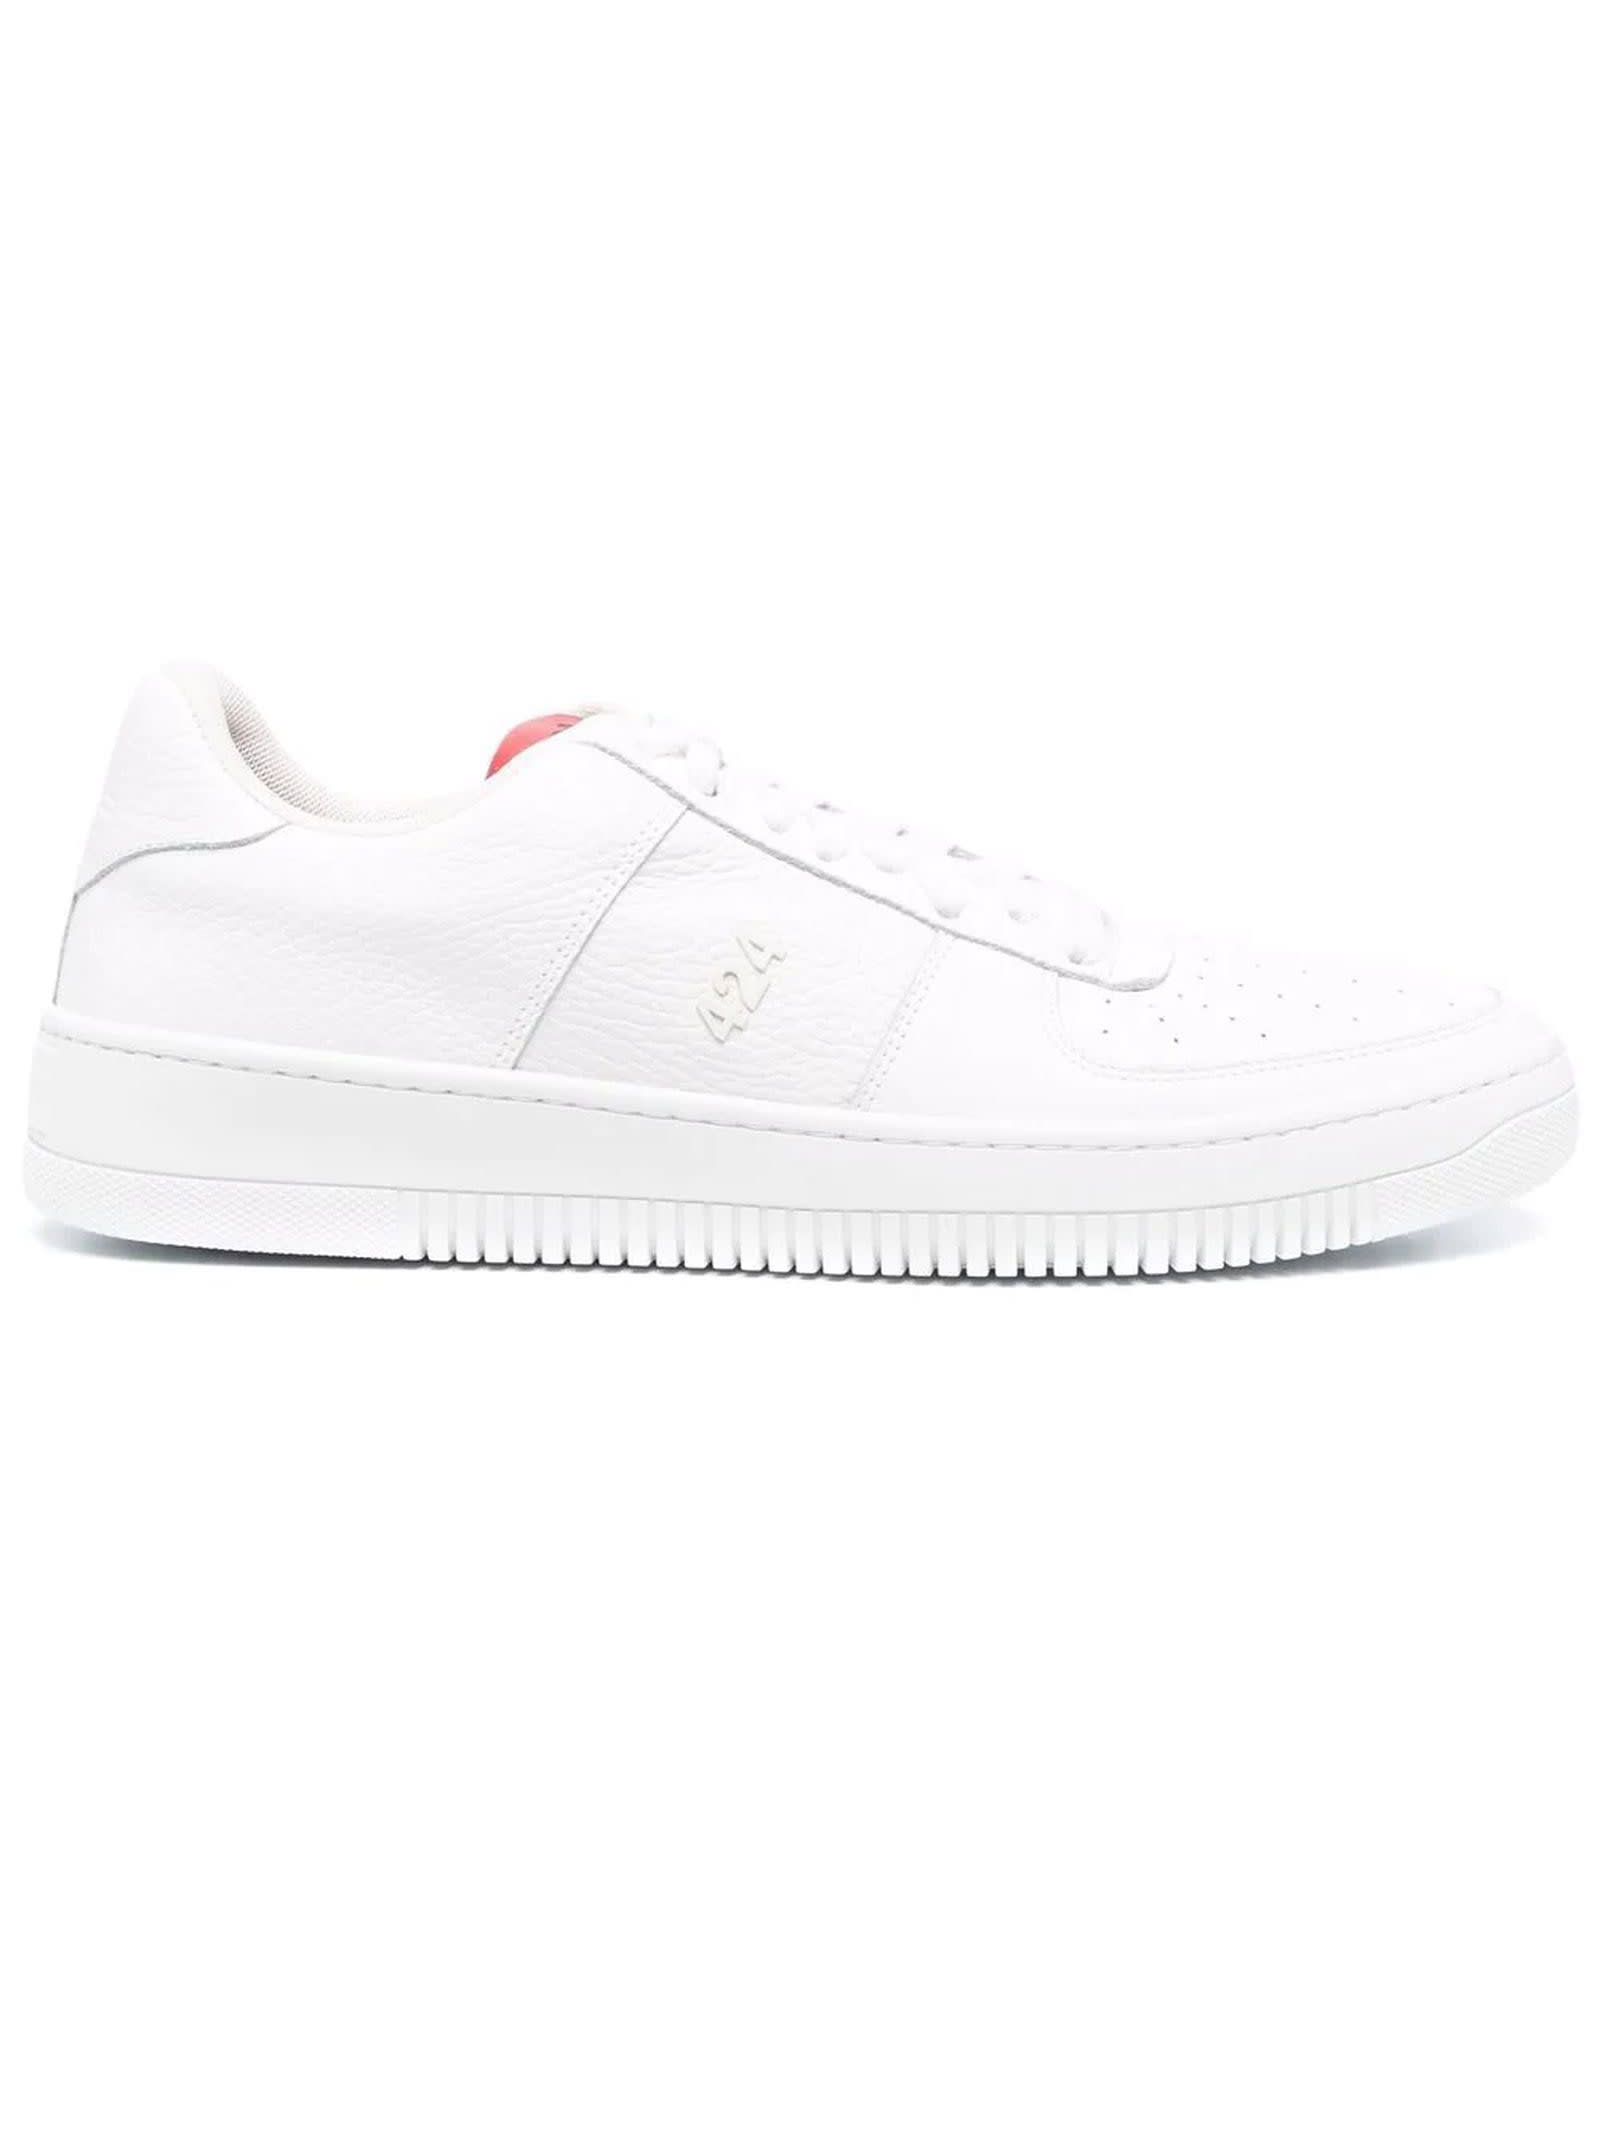 FourTwoFour on Fairfax White Calf Leather Sneakers